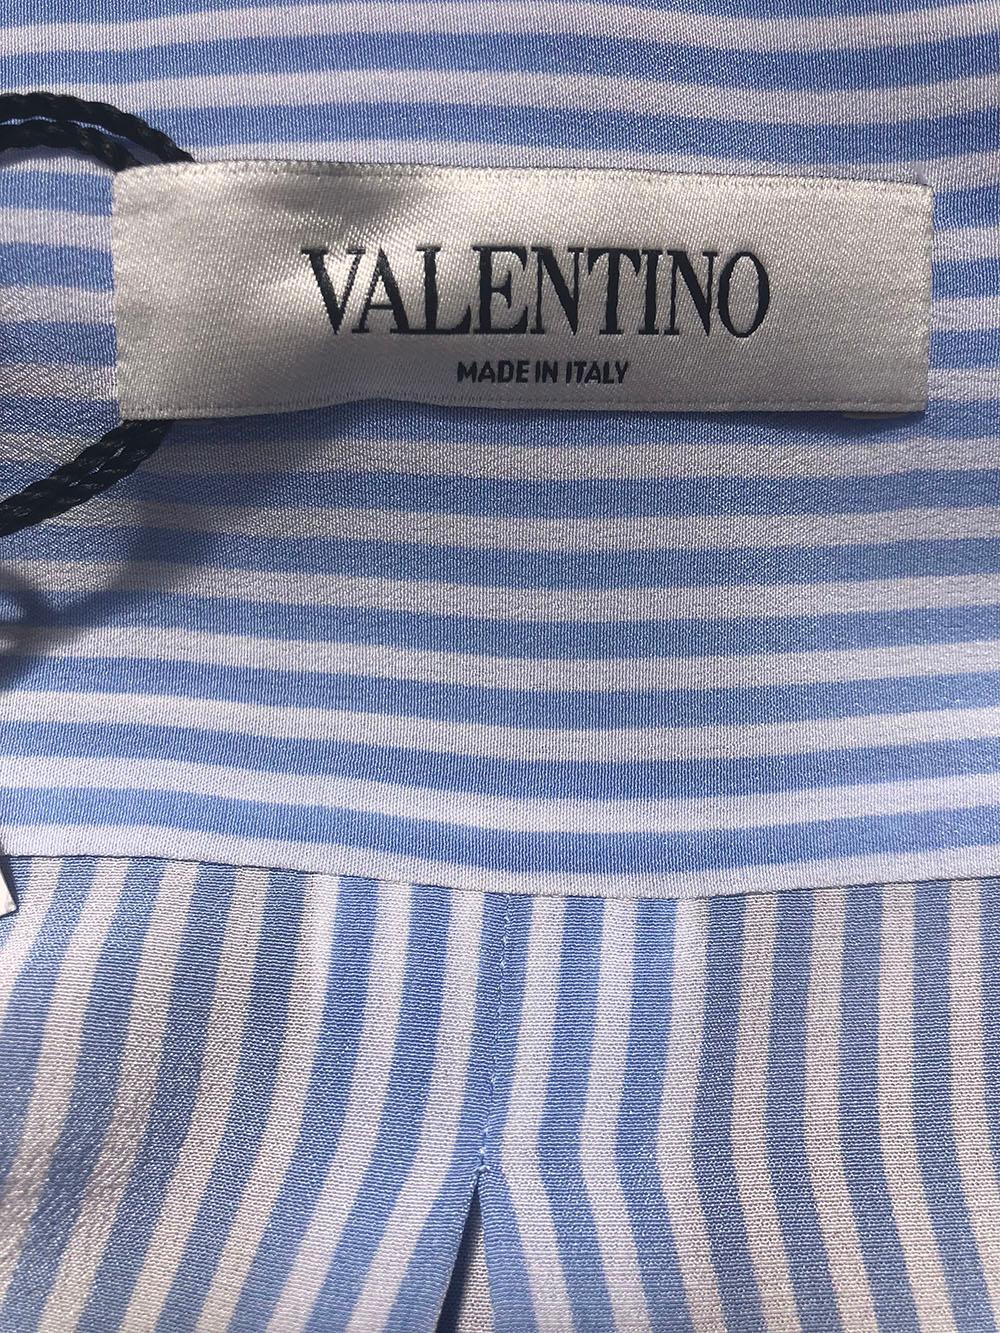 Valentino Pinstripe Blue and White Silk Button Down In Excellent Condition For Sale In Thousand Oaks, CA